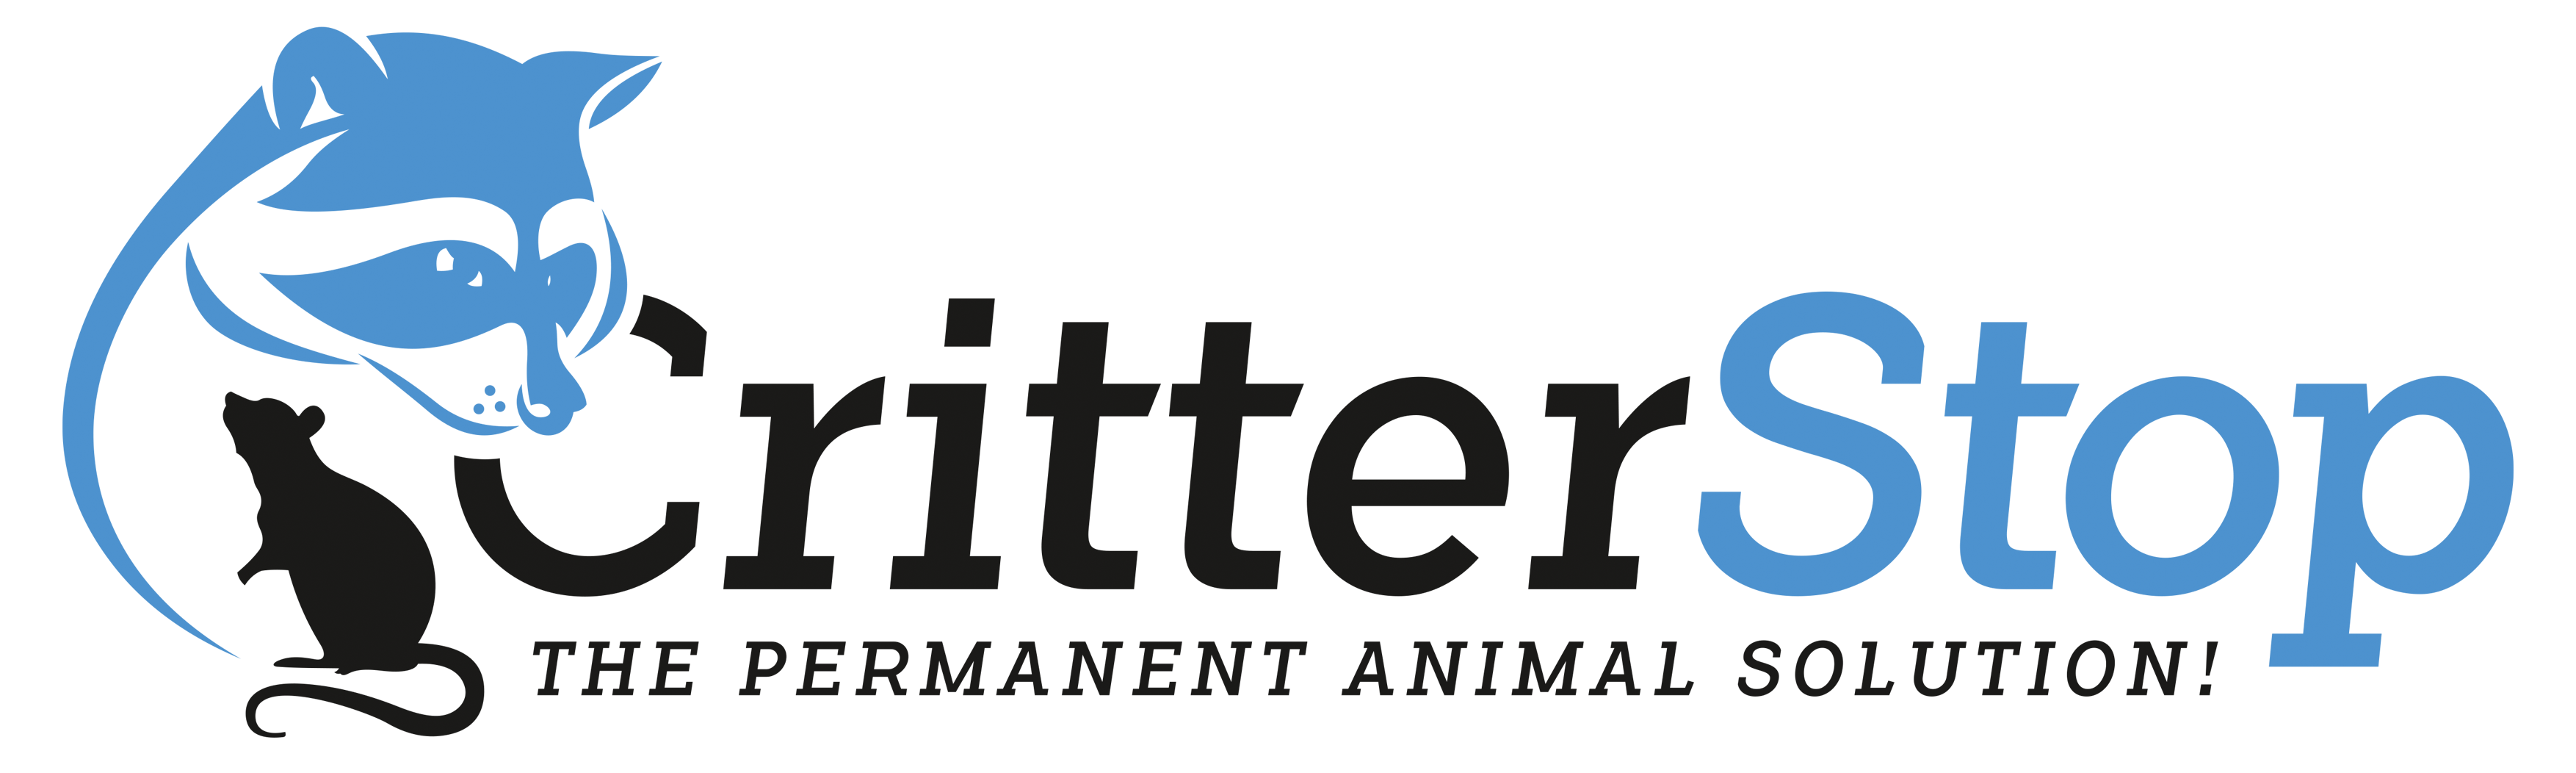 Critter Stop Boasts As the Go-To Provider of Wildlife Removal Services